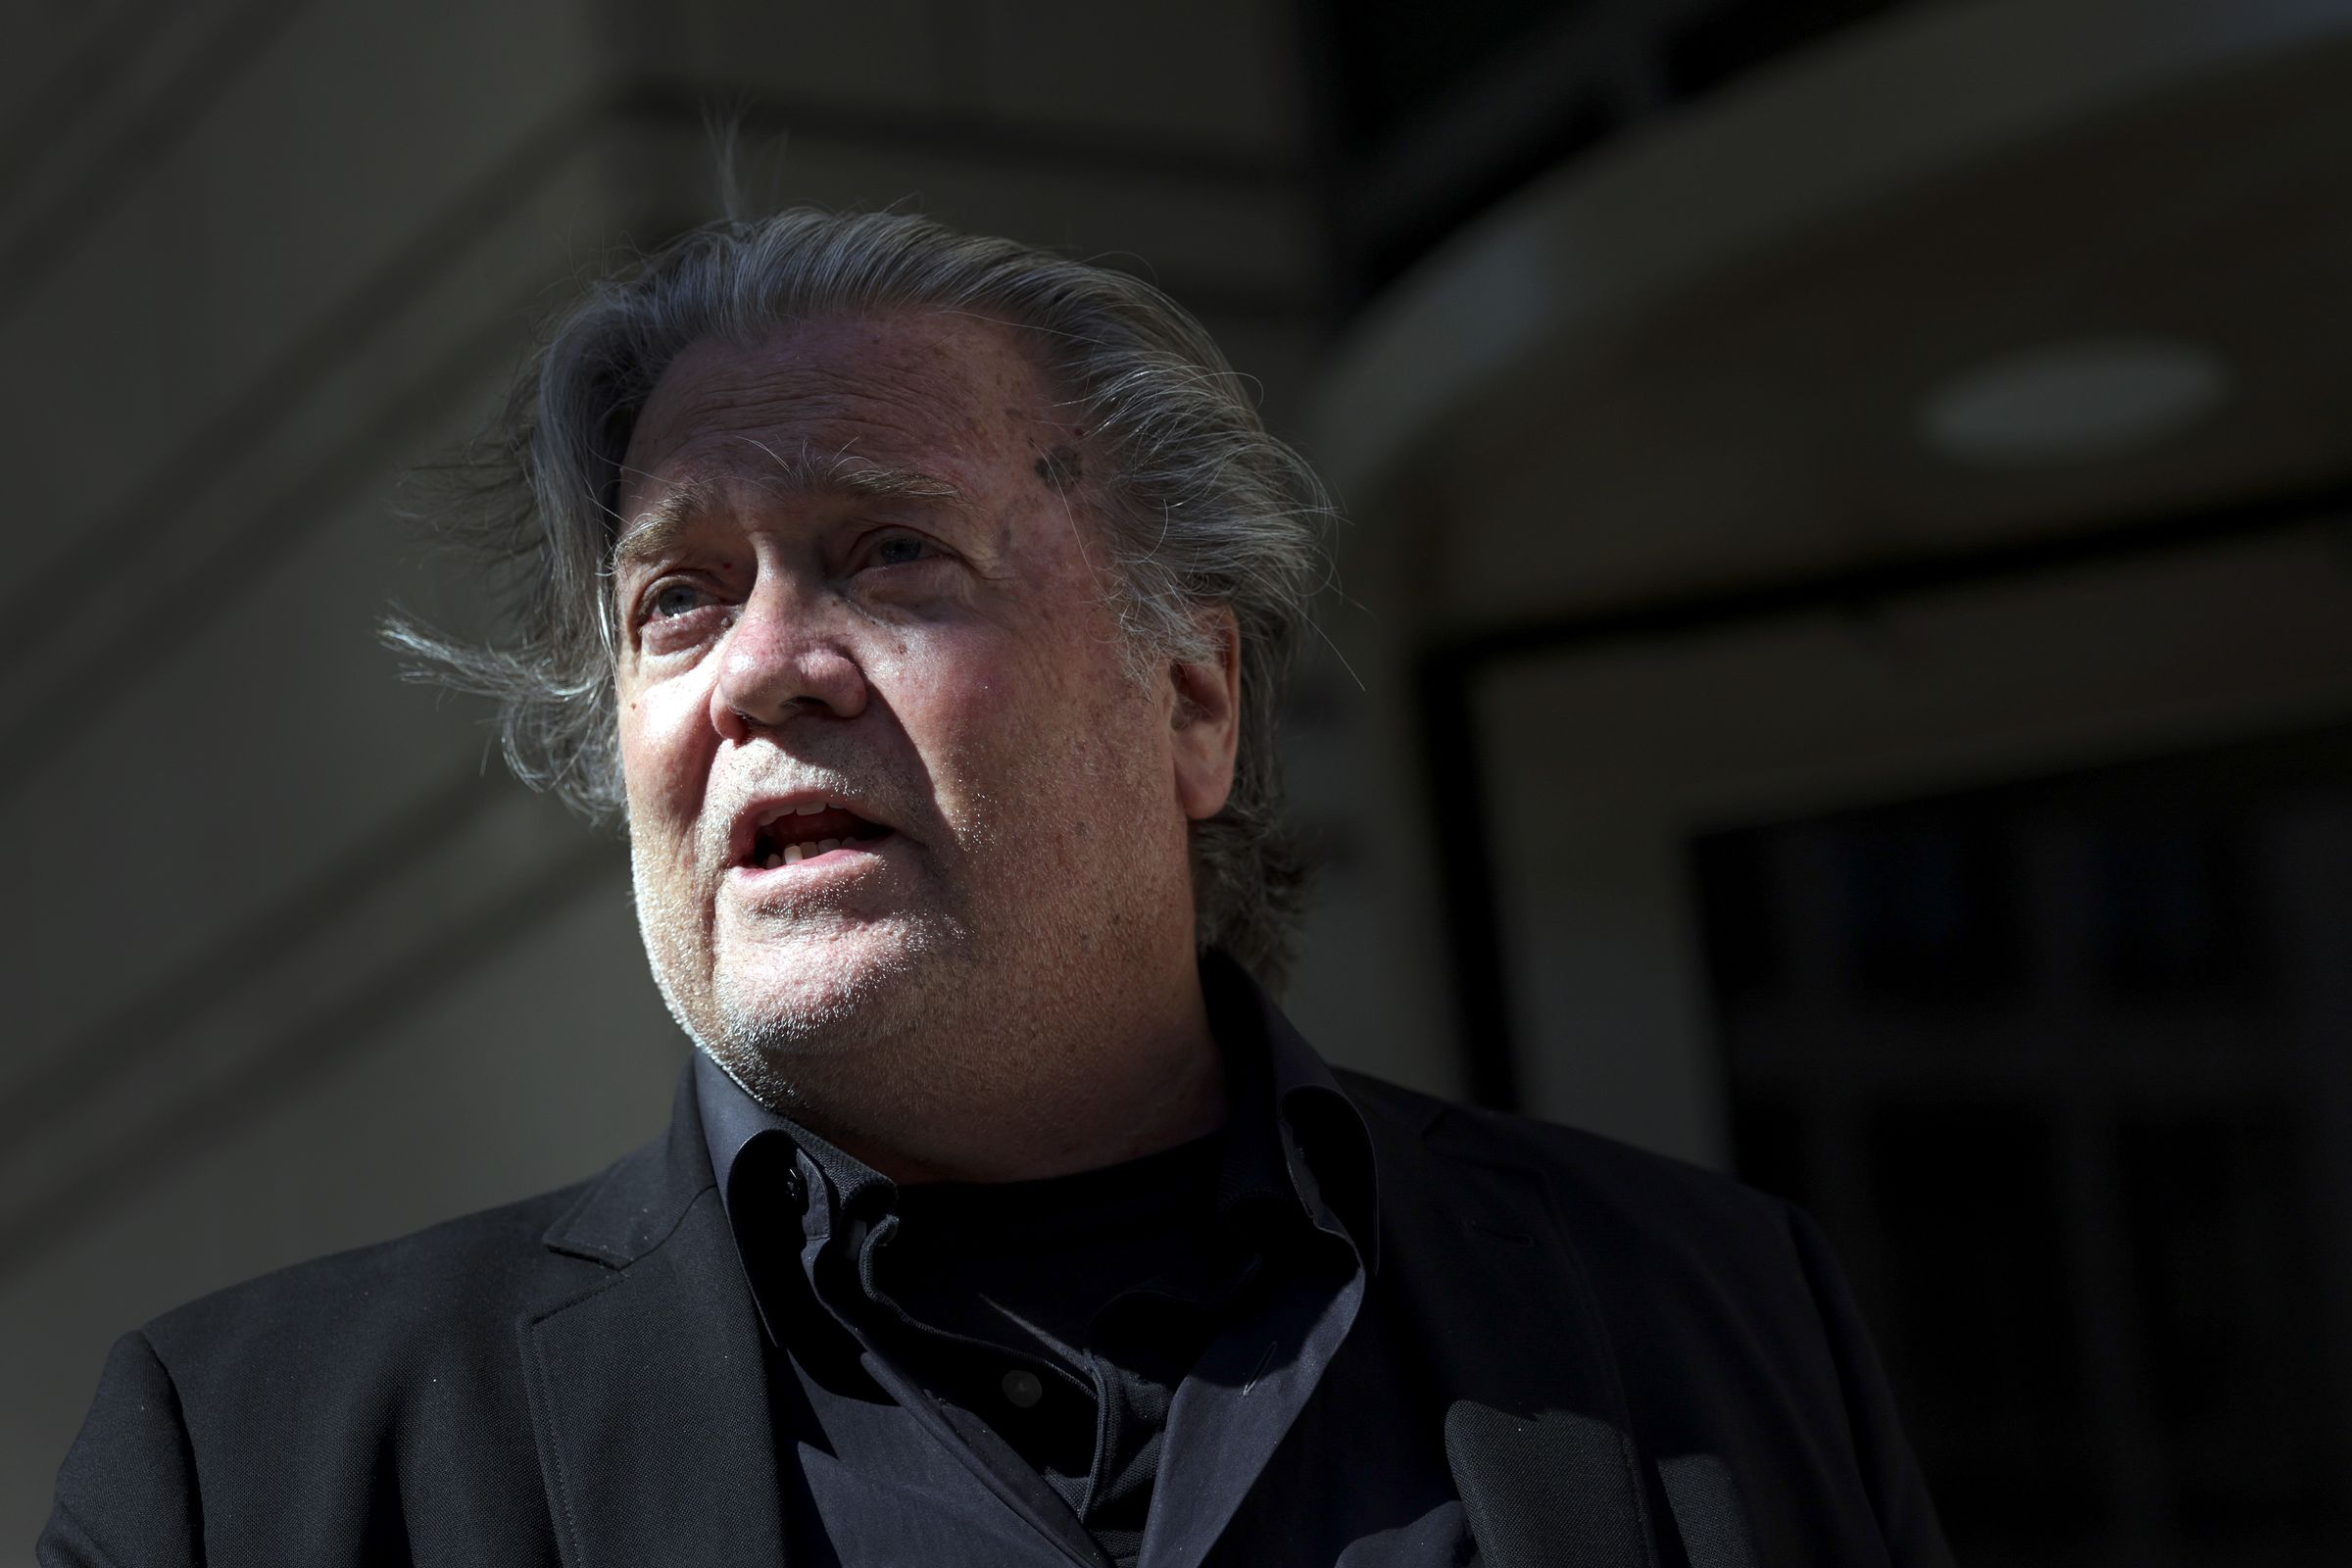 Trump Advisor Steve Bannon Goes To Court To Contest Contempt Charges